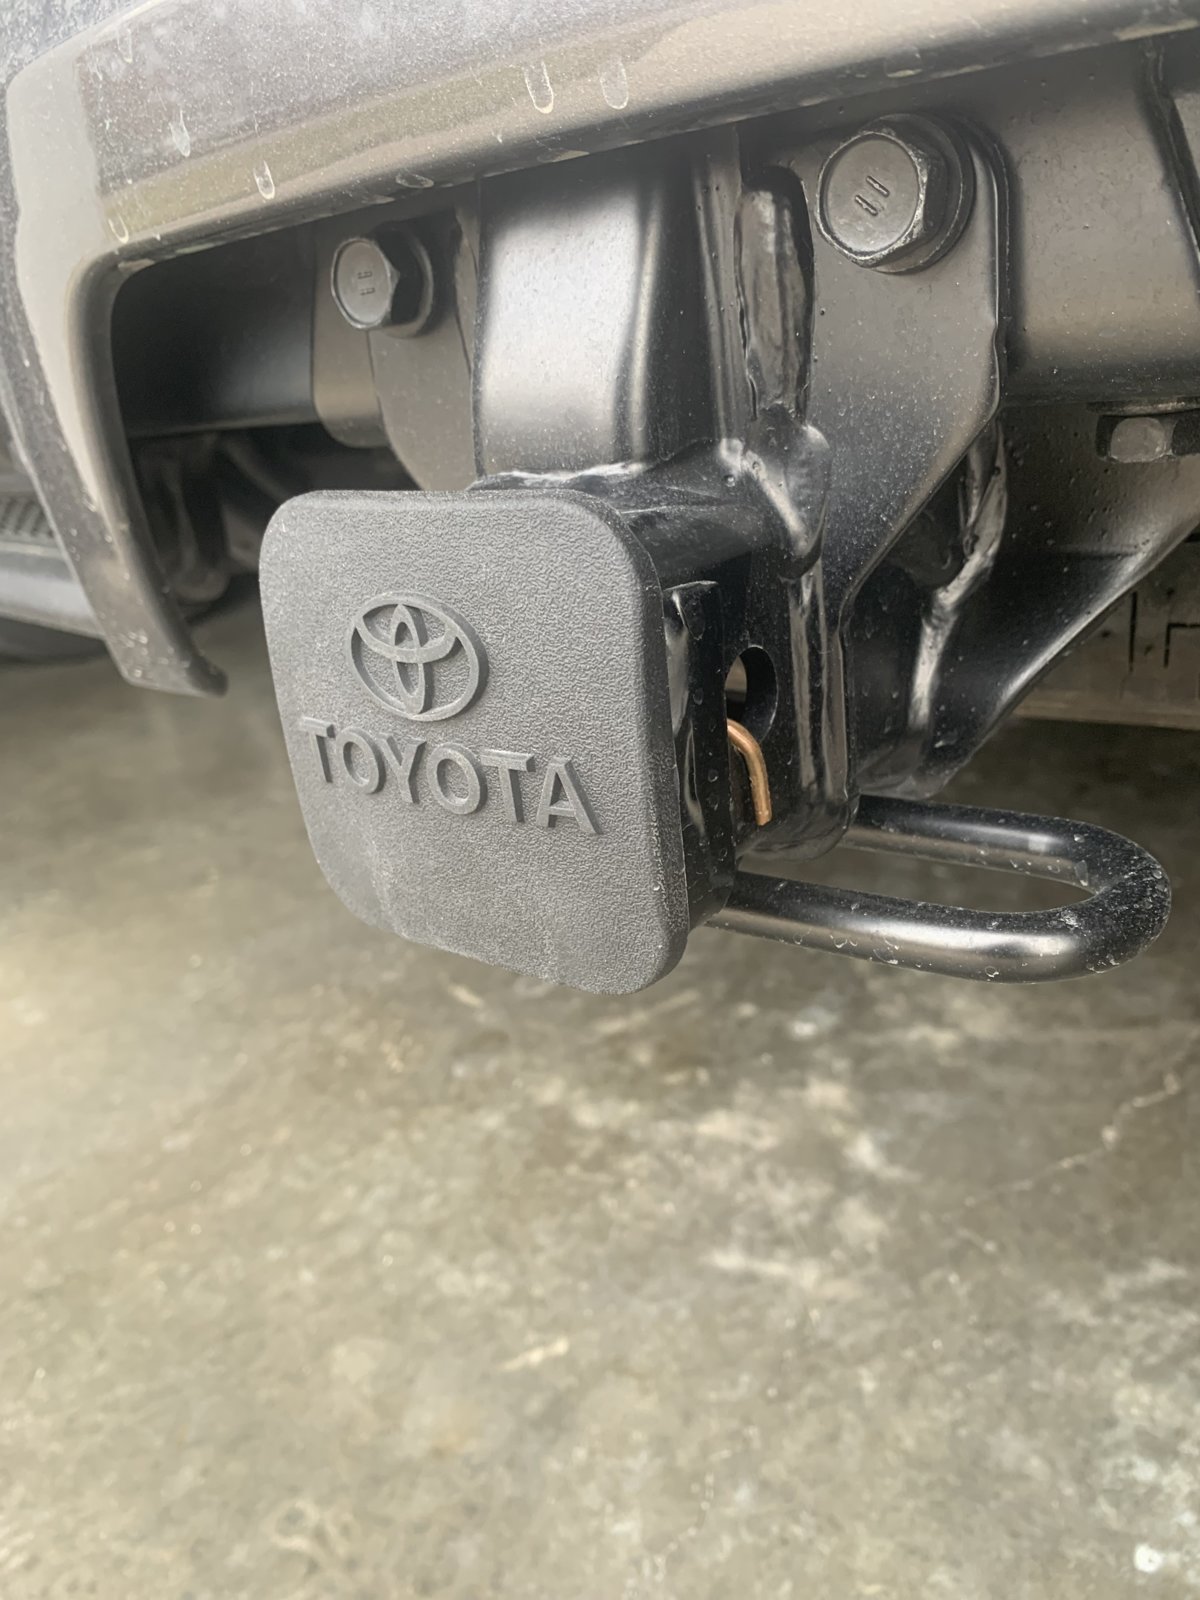 Does this look unsafe? Rusted hitch receiver on '08 v8 sr5